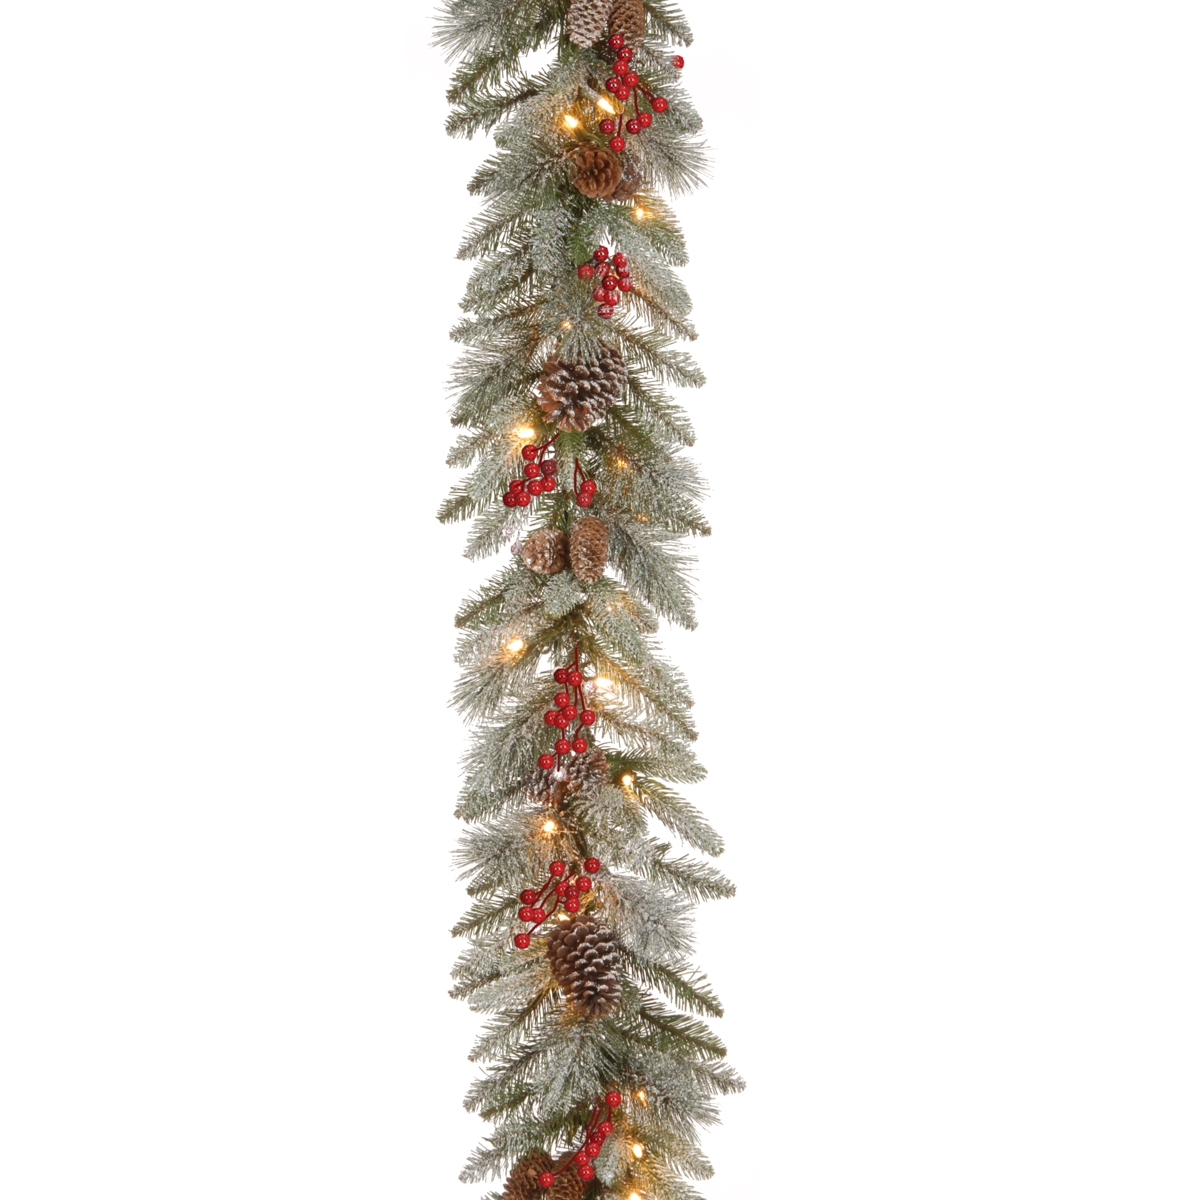 9'x12" Feel Real Snowy Bristle Berry Garland with Red Berries, Mixed Cones & 50 Clear Lights - Green